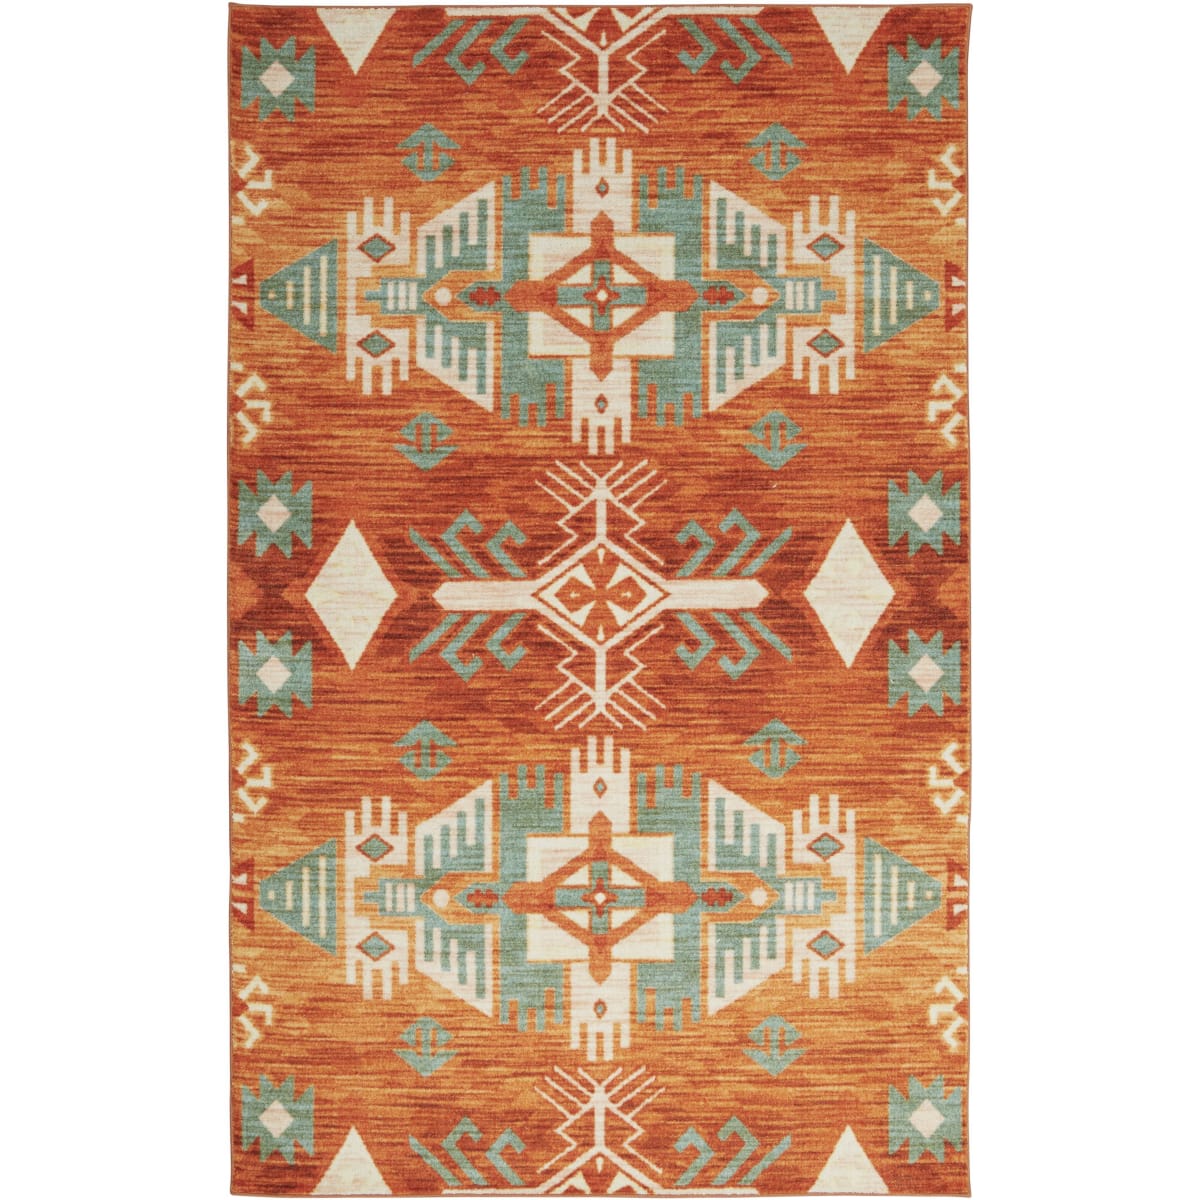 Mohawk Home Z0100 A451 096120 Ec, Mohawk Area Rugs Discontinued